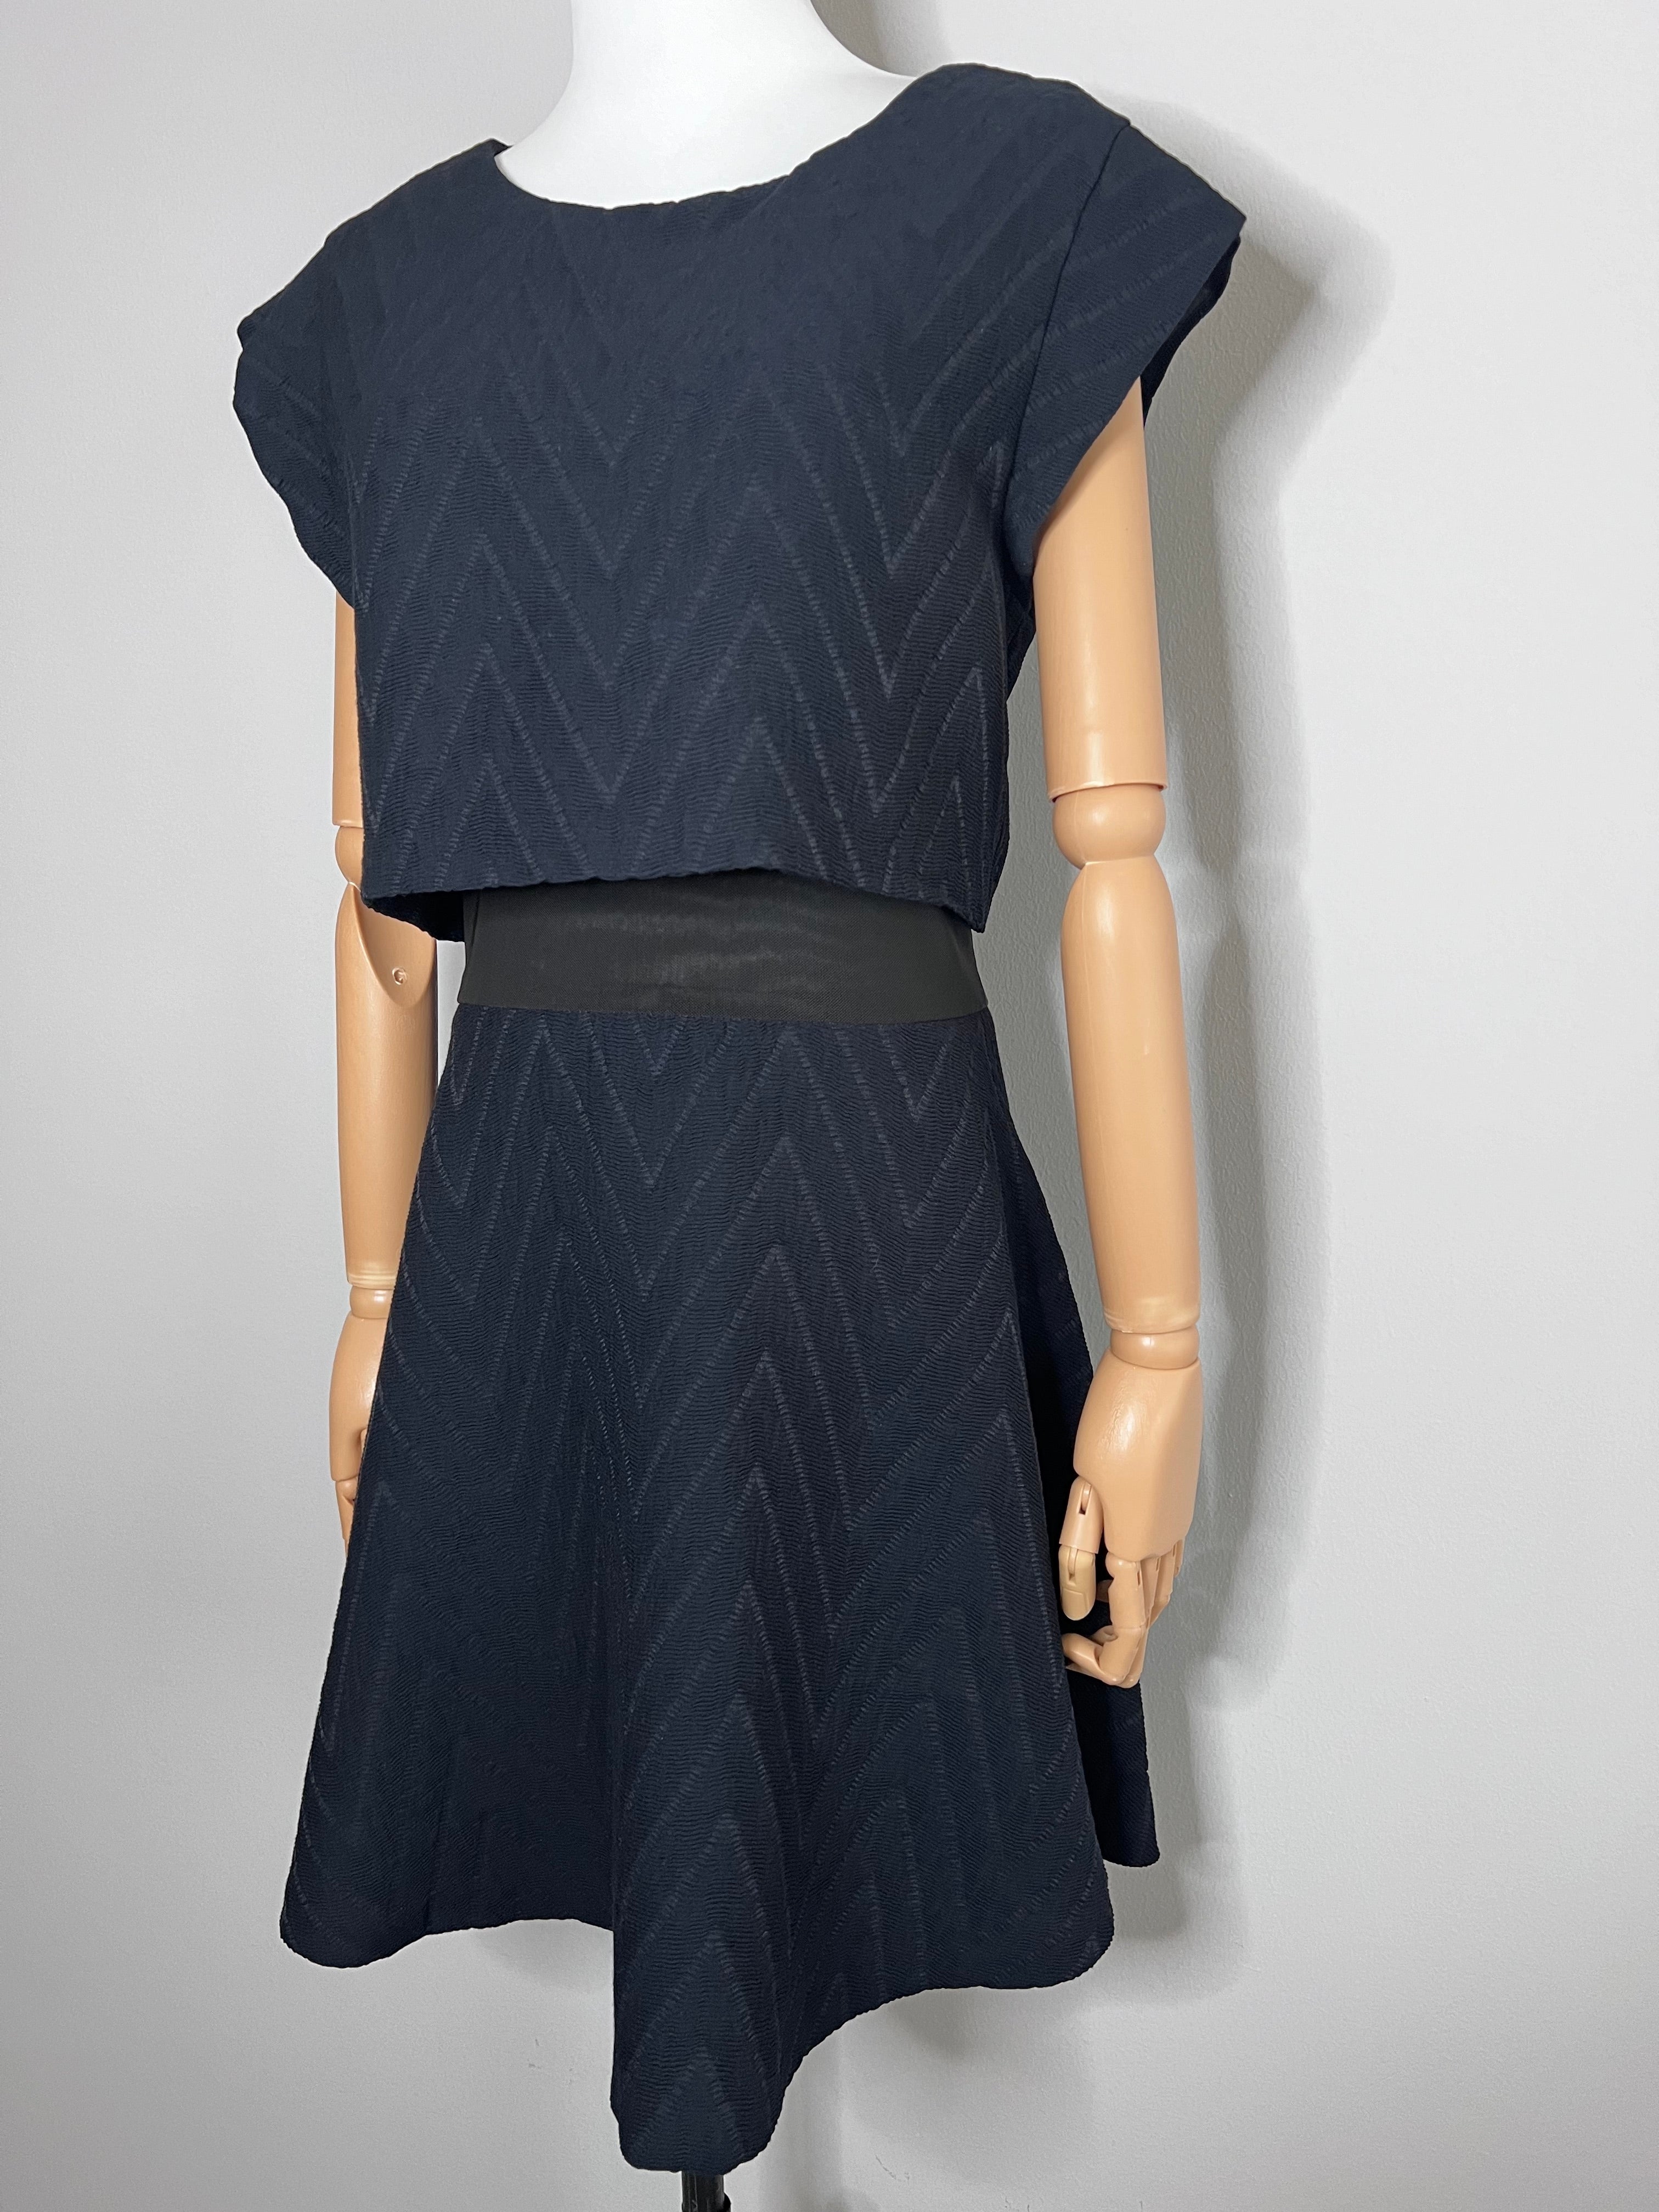 Navy blue A-line dress patterned ruffled and mesh accents short sleeve with exposed zip closure at back - MAJE